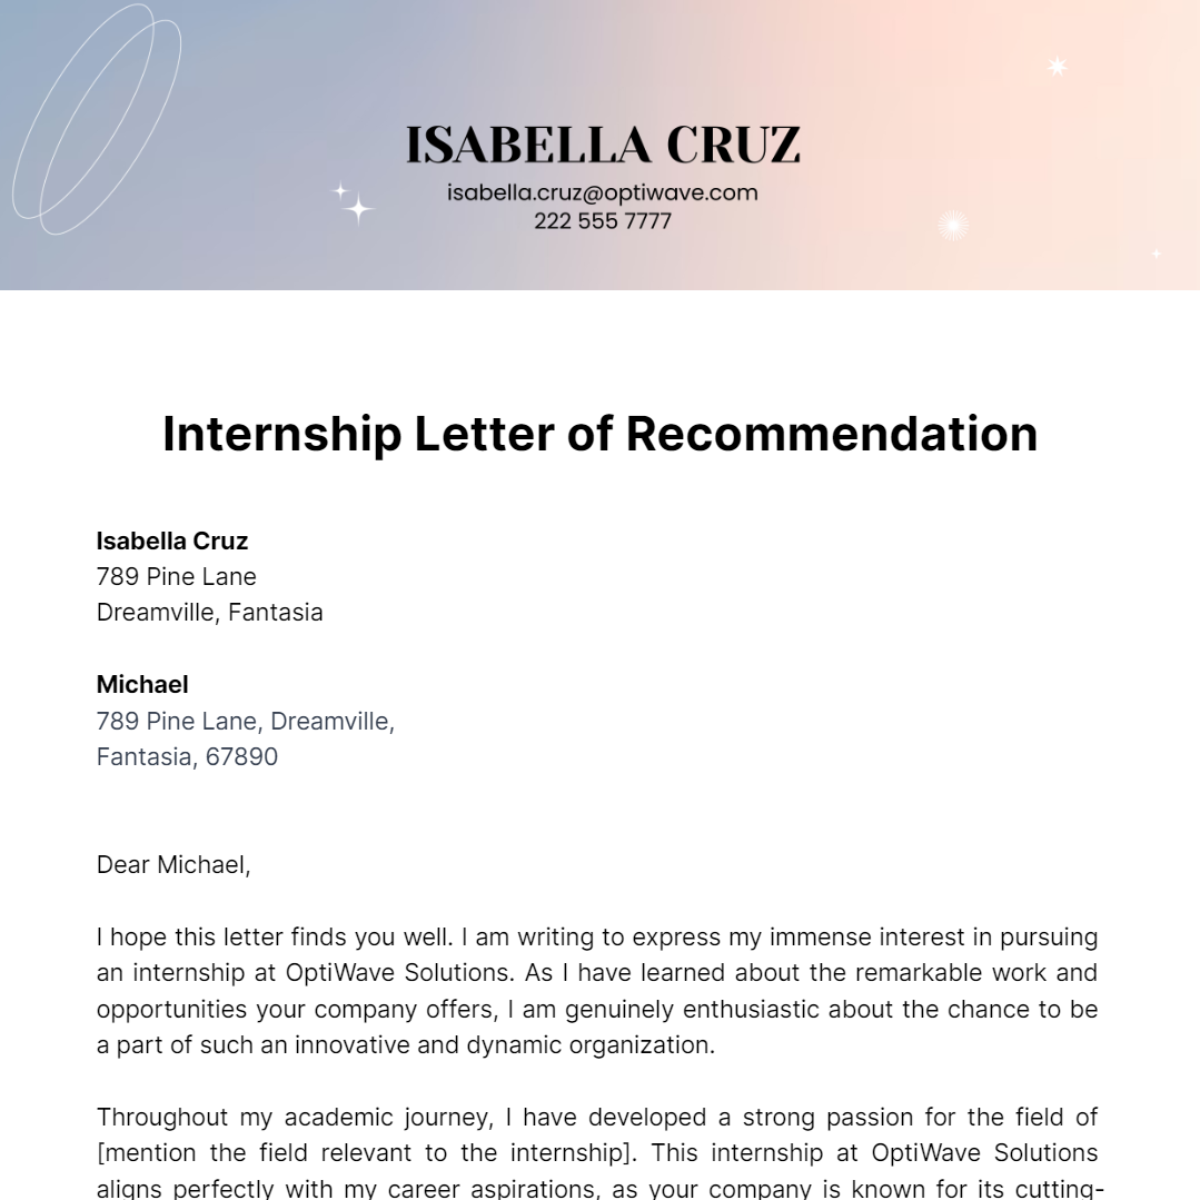 Internship Letter of Recommendation Template